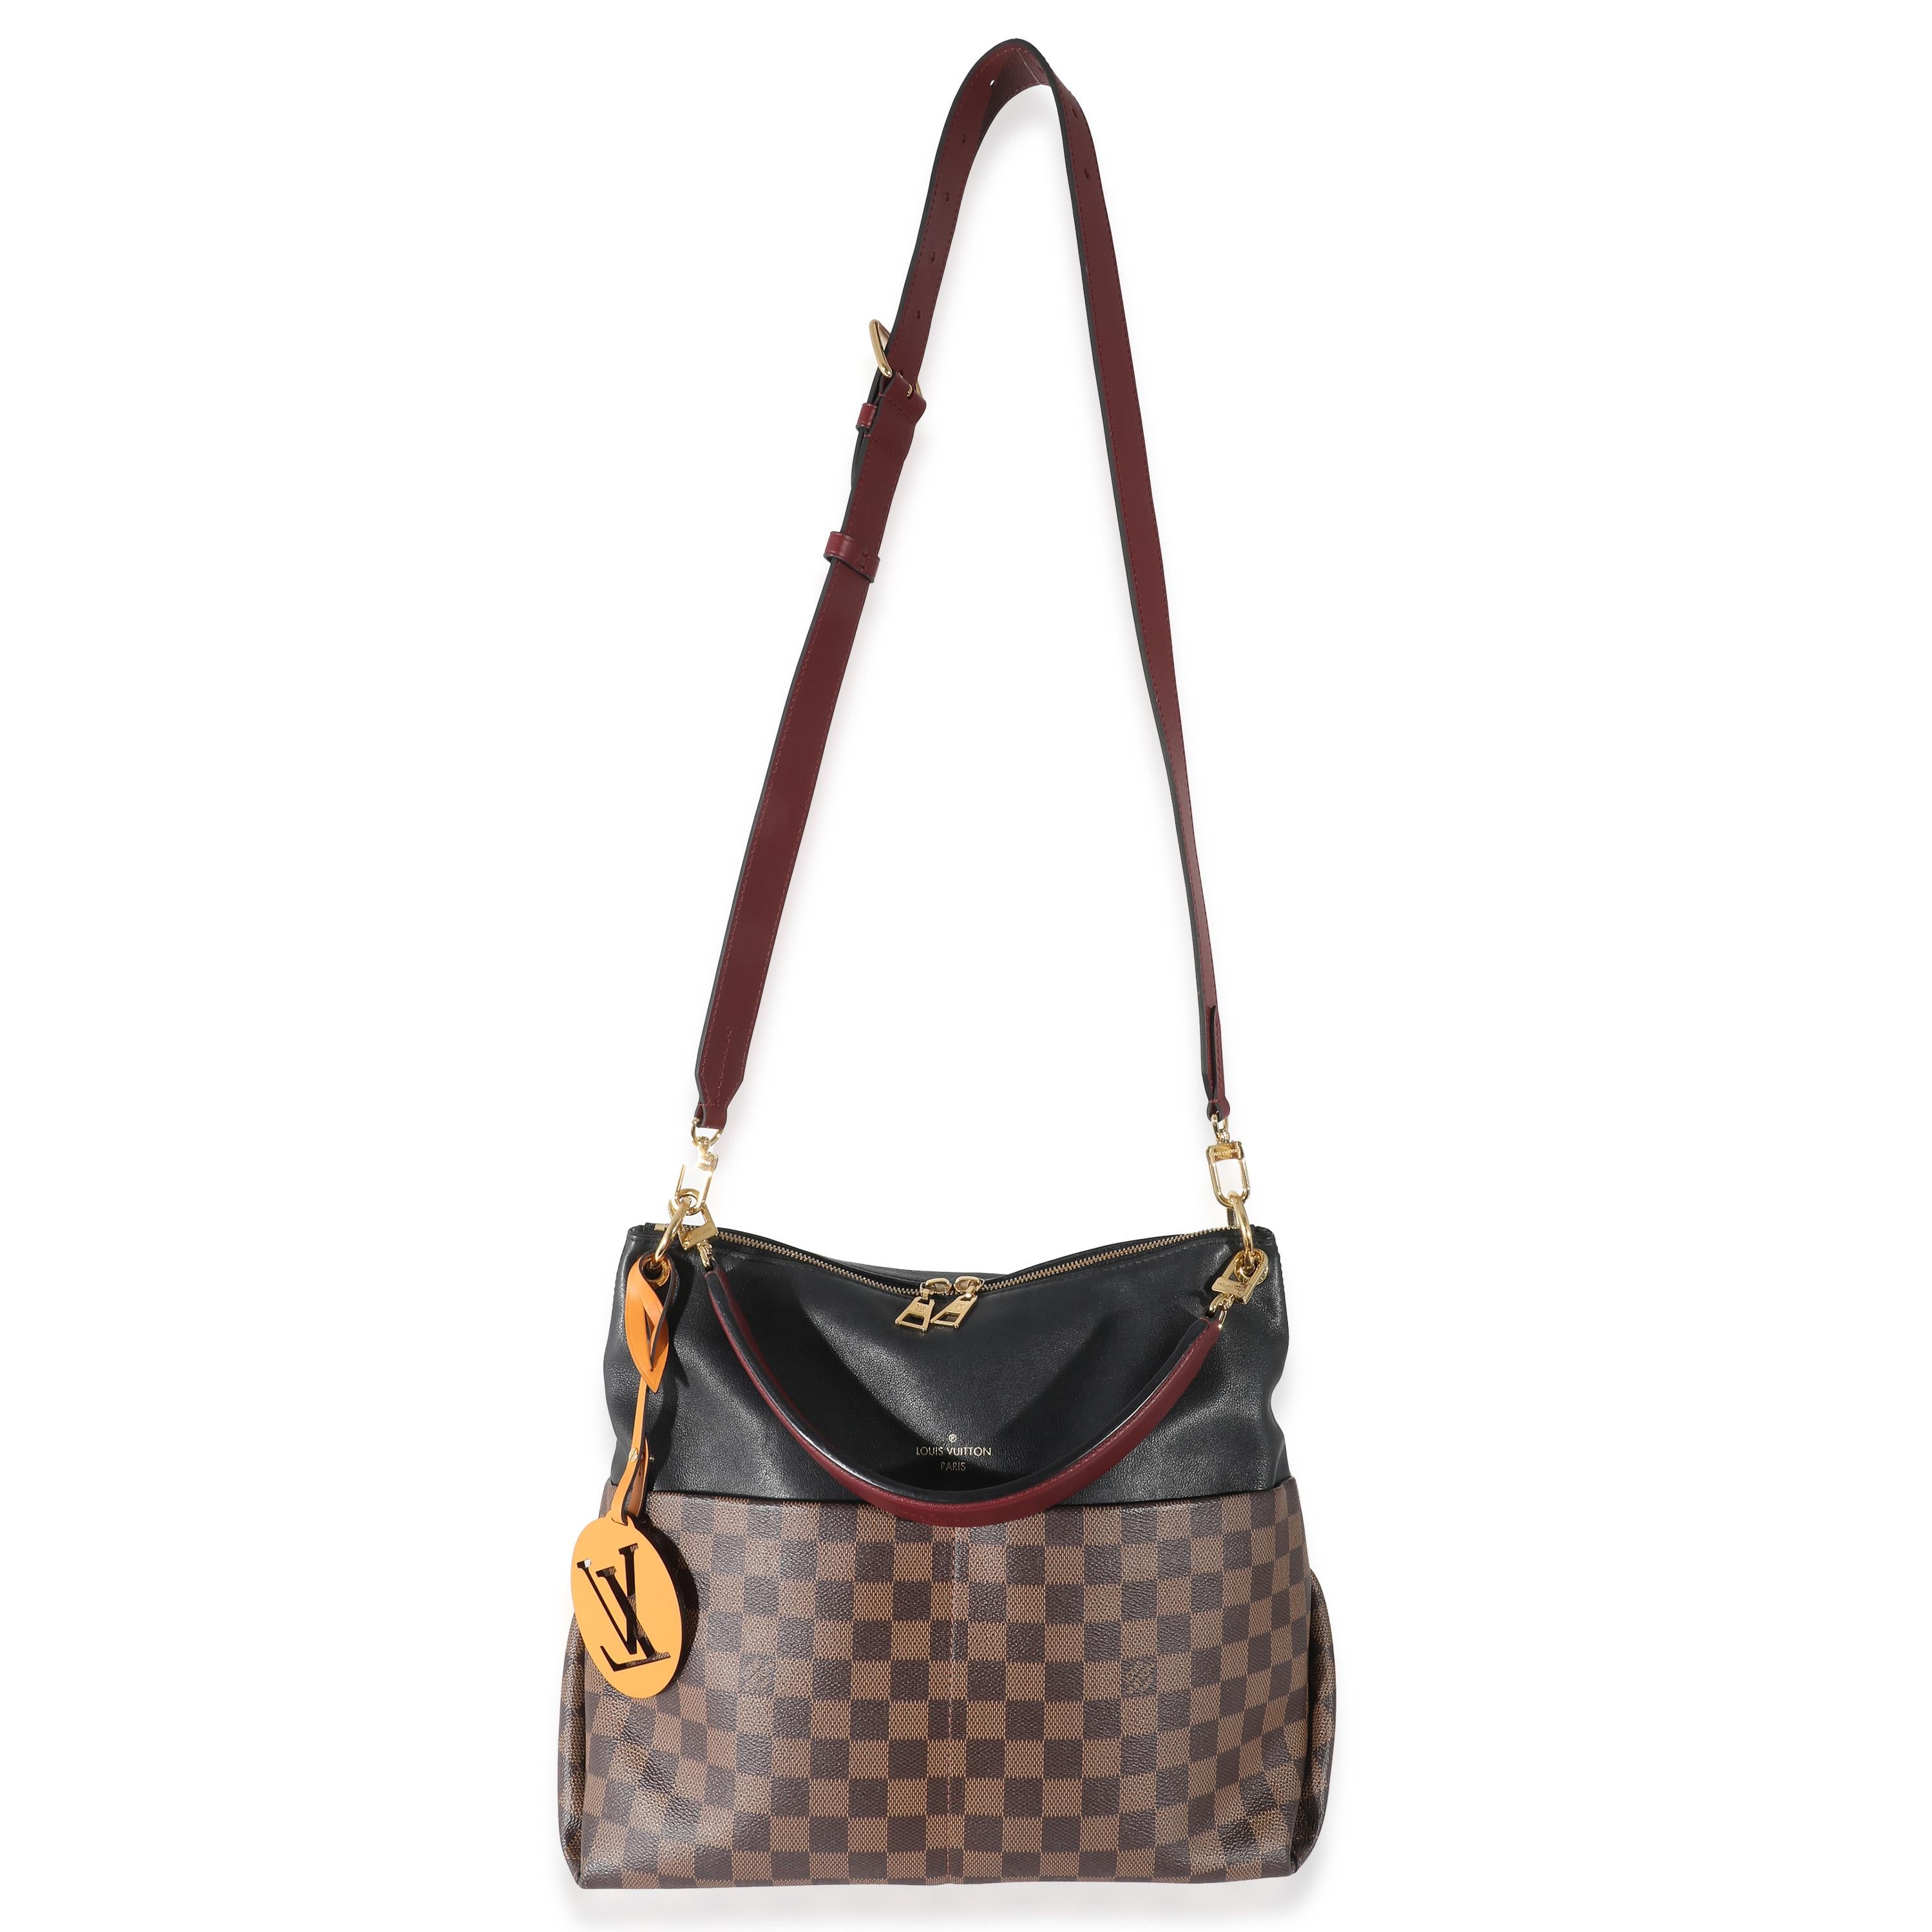 Listing Title: Louis Vuitton Damier Ebene Maida Hobo
SKU: 133685
MSRP: 2560.00 USD
Condition: Pre-owned 
Handbag Condition: Very Good
Condition Comments: Item is in very good condition with minor signs of wear. Exterior scuffing and discoloration.